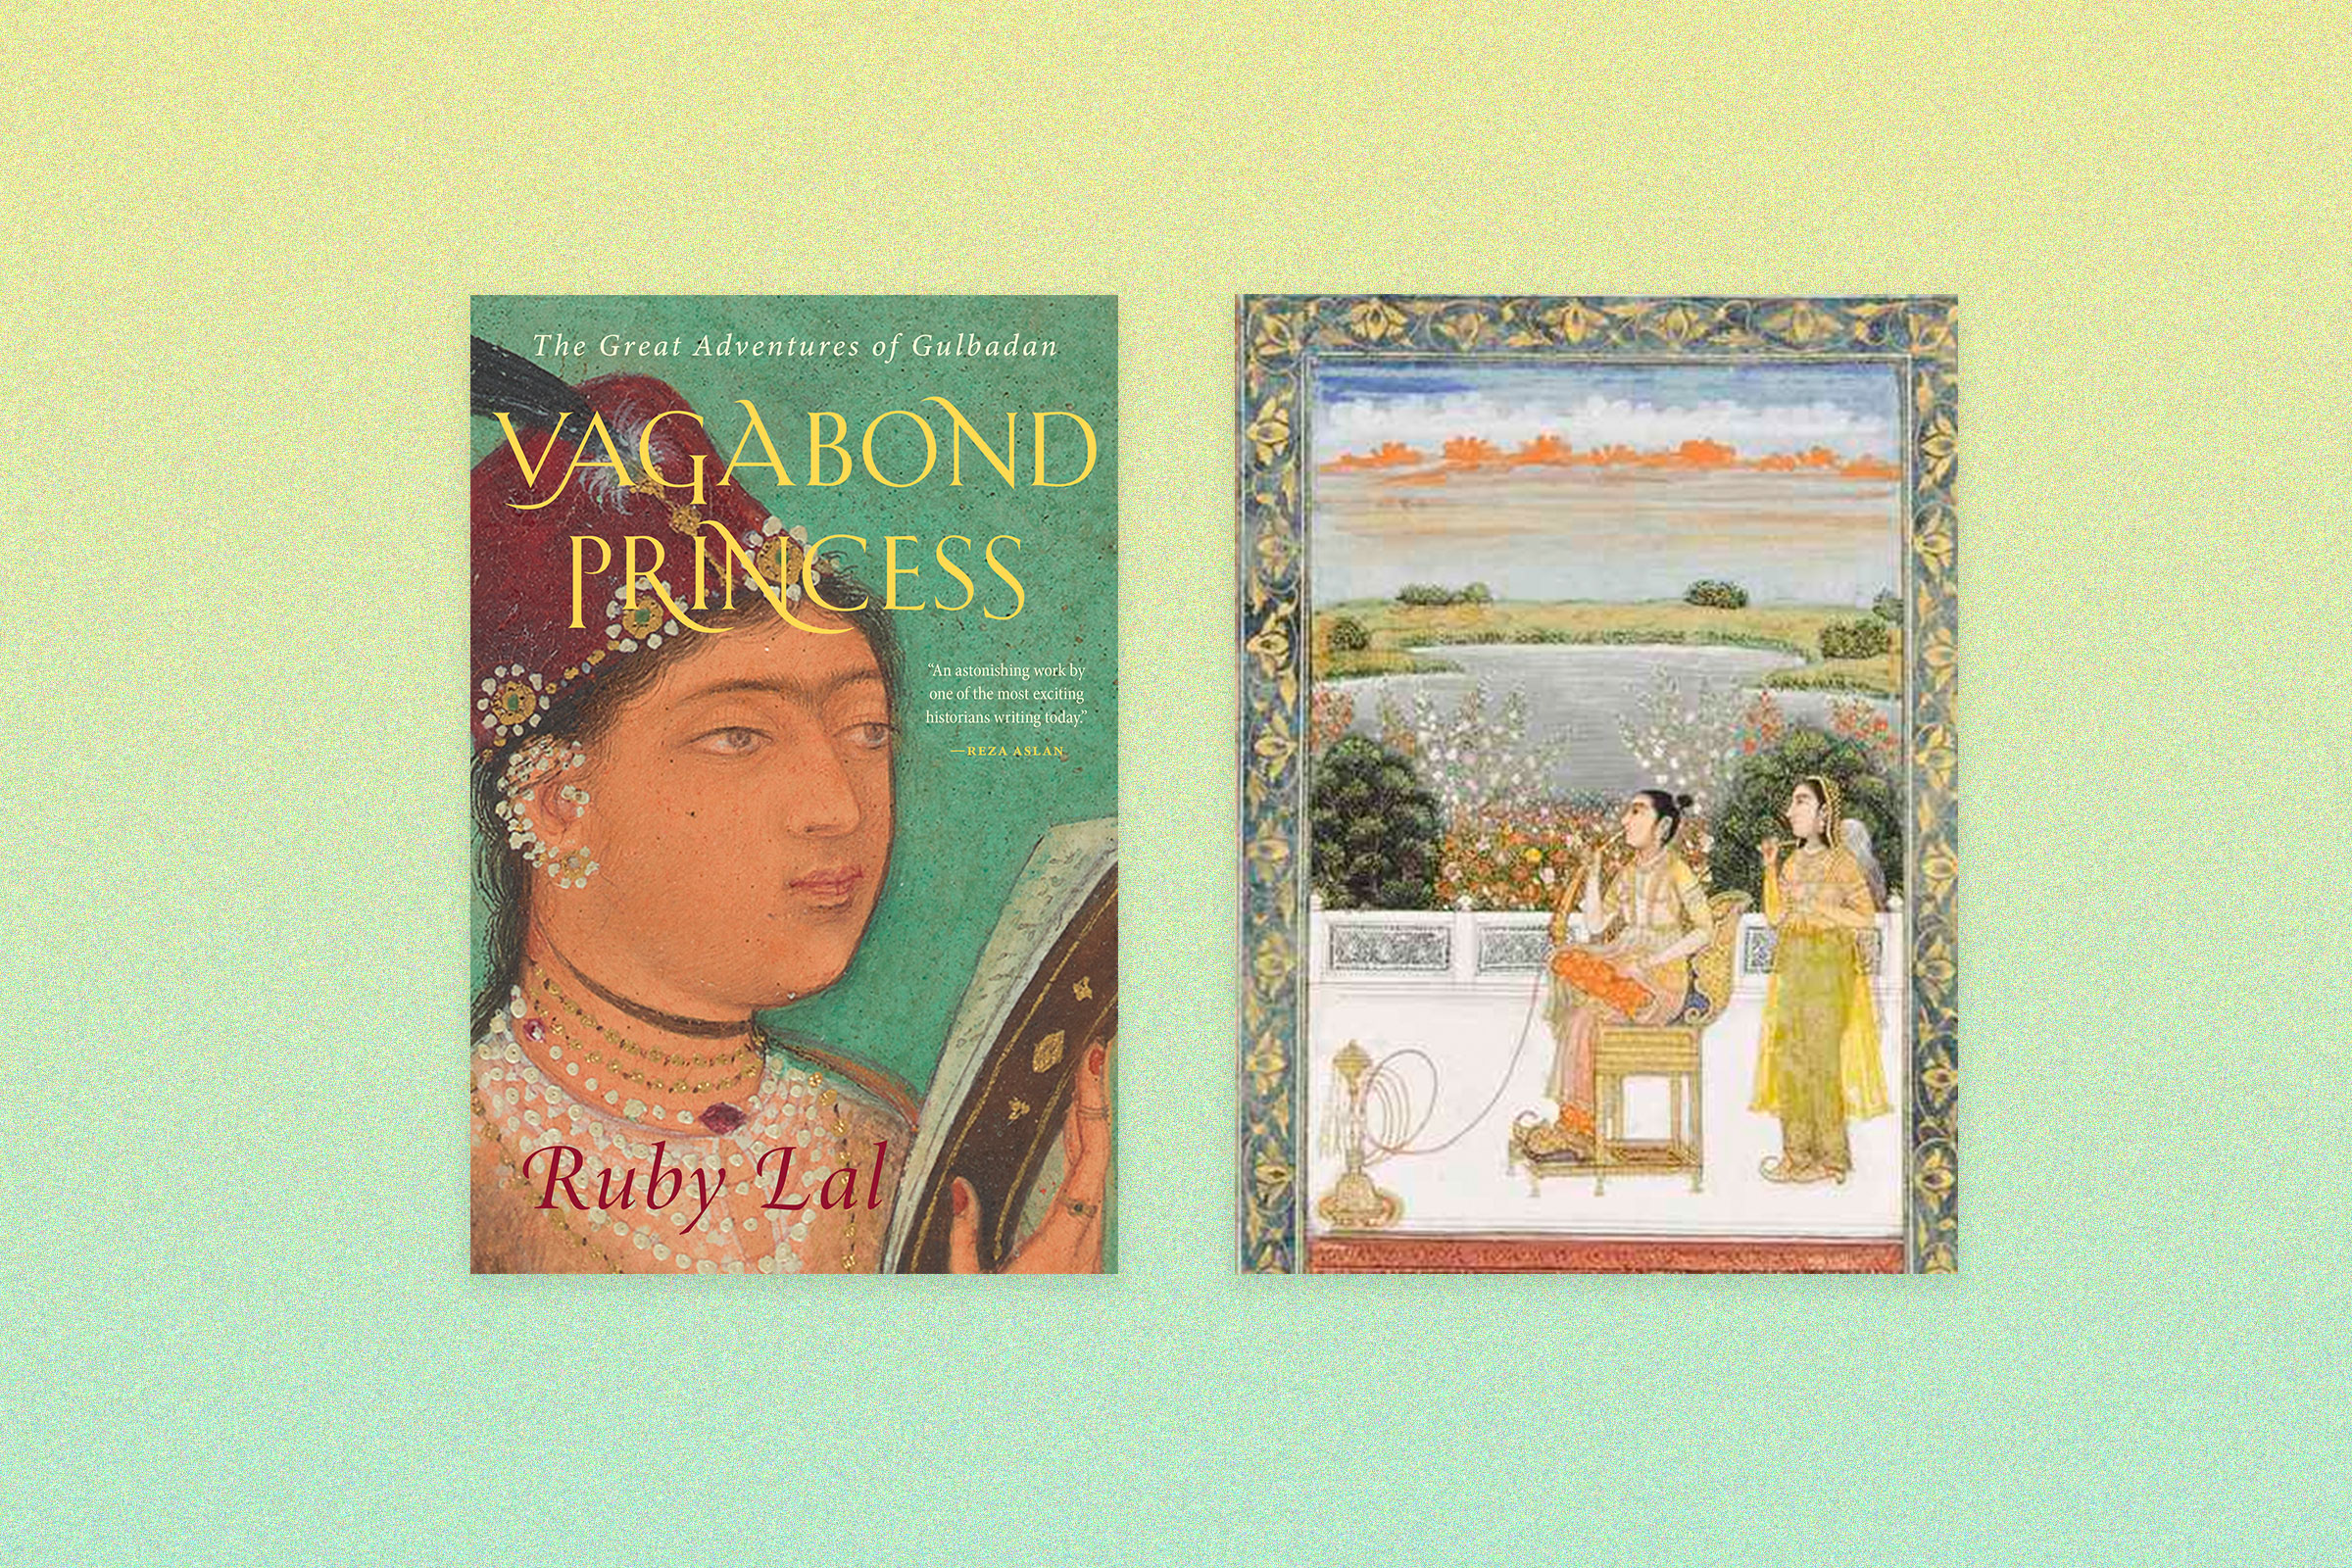 The cover art for Vagabond Princess by Ruby Lal; Gulbadan Begum smoking on a terrace